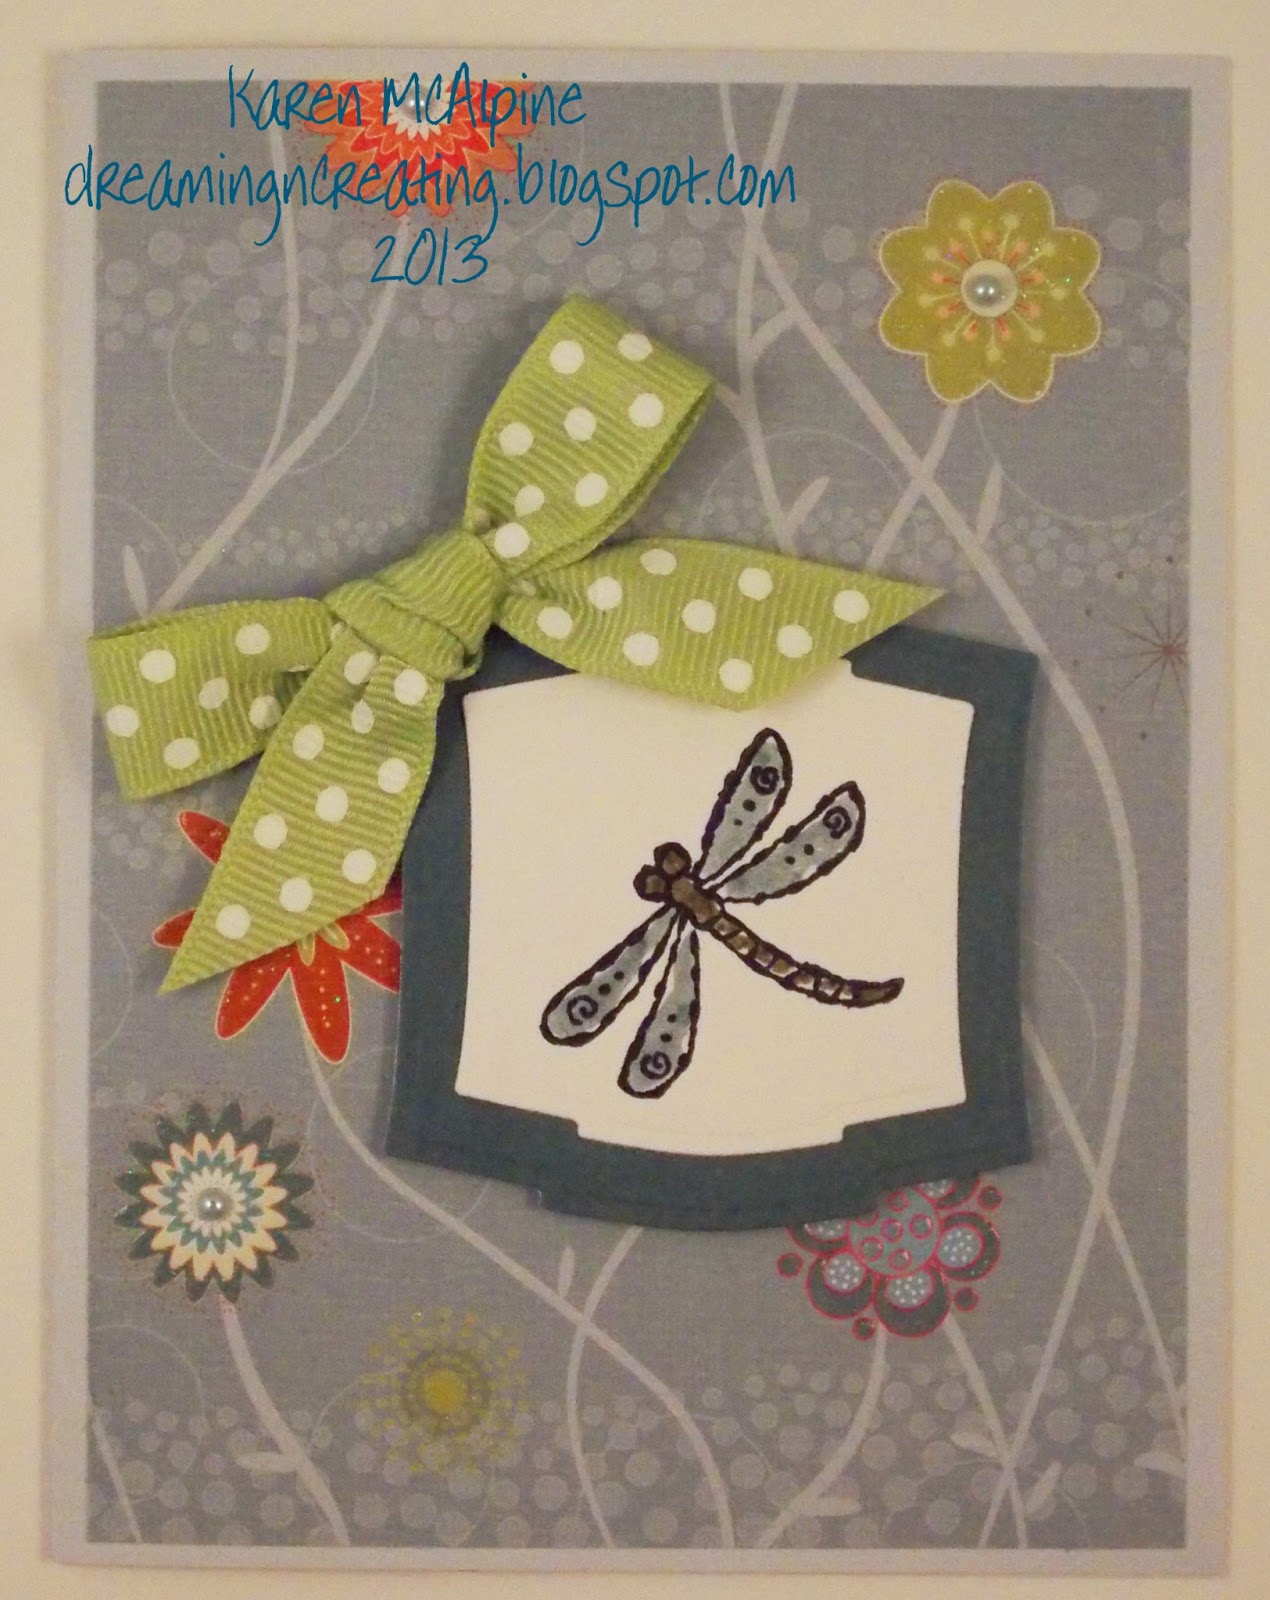 Dreaming and Creating: Blue, Blue, Blue, Butterflies and Dragonflies!